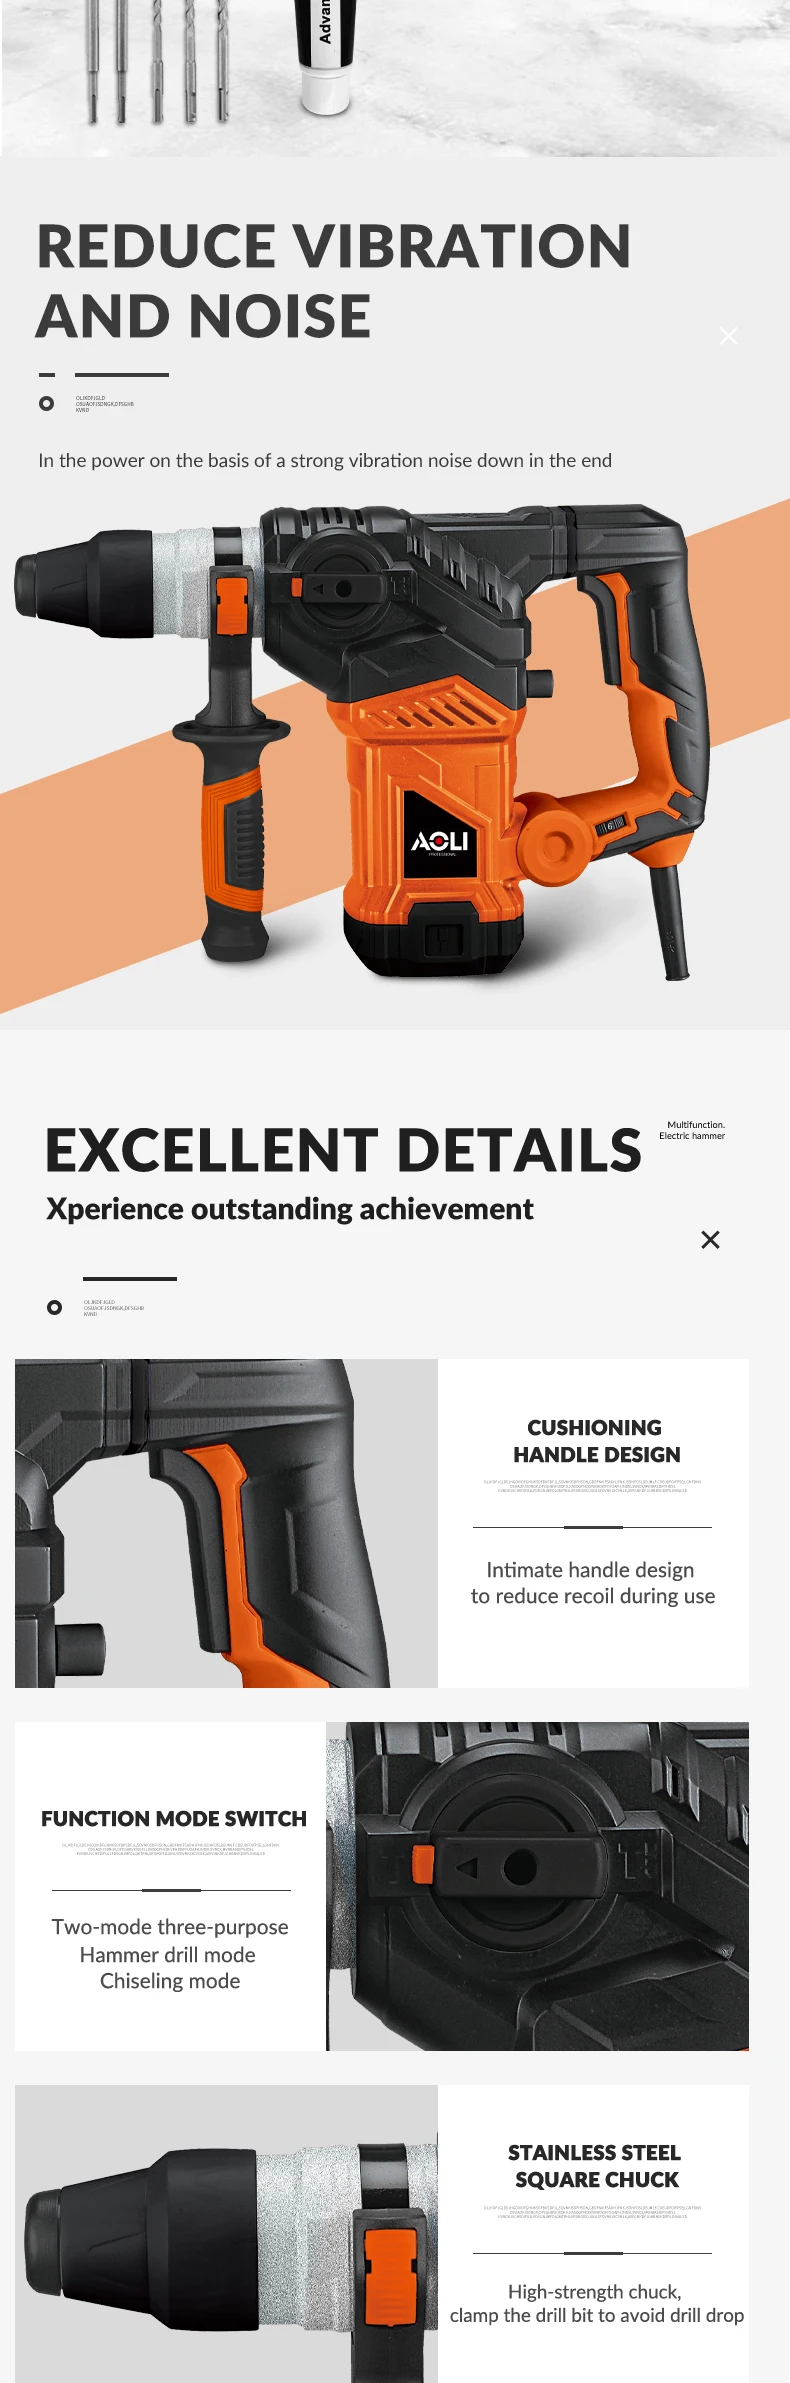 sds max rotary hammer hengfeng quality with safety clutch